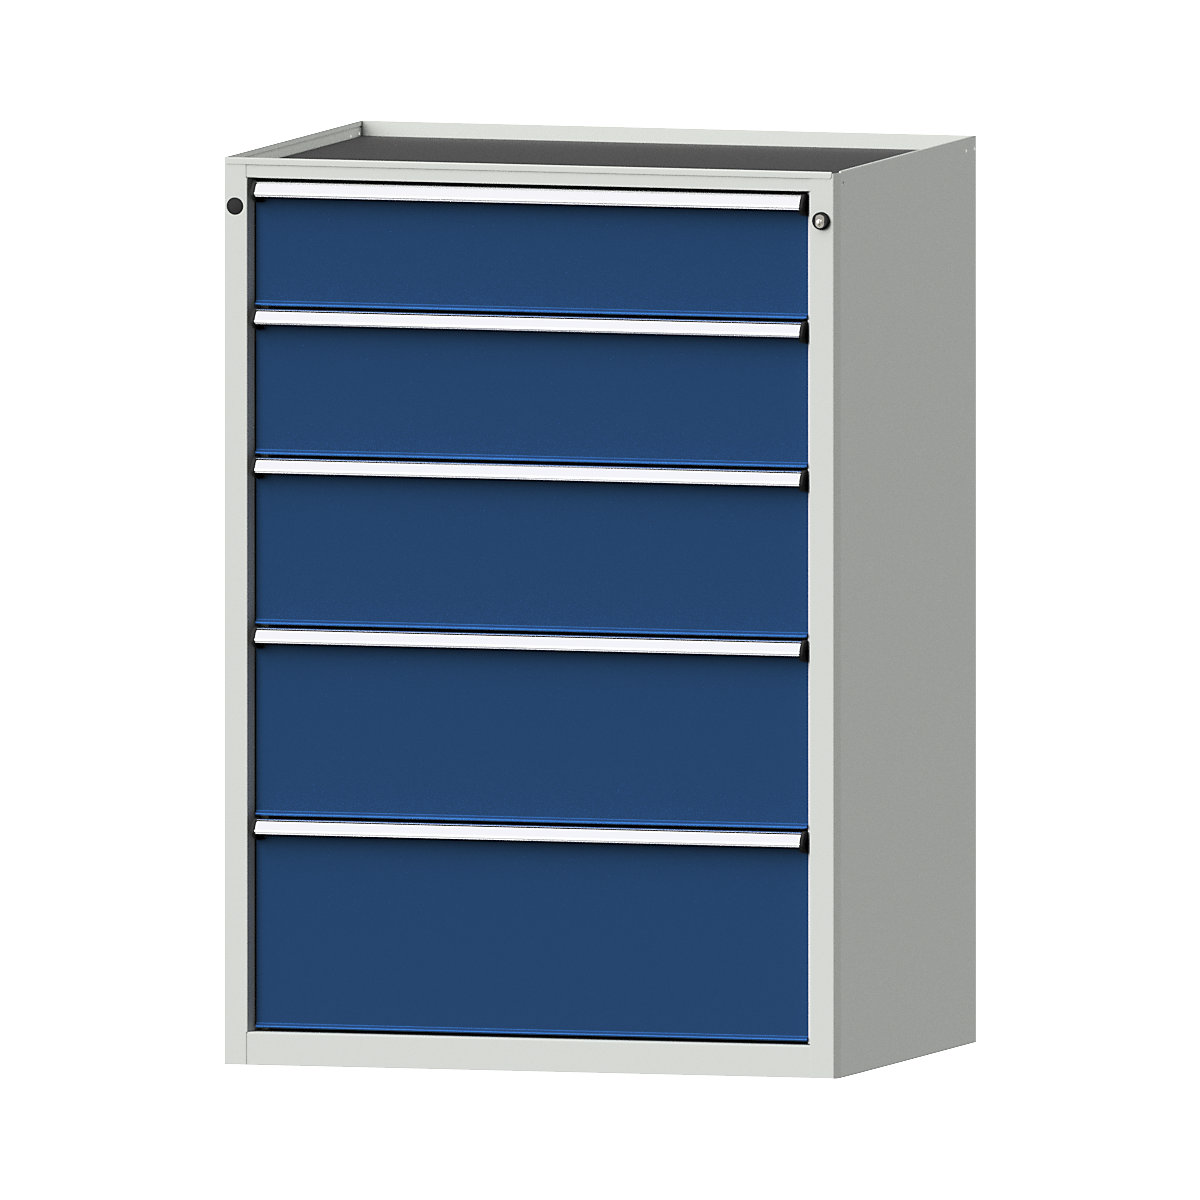 Drawer cupboard – ANKE, WxD 910 x 675 mm, 5 drawers, height 1280 mm, front in gentian blue-5